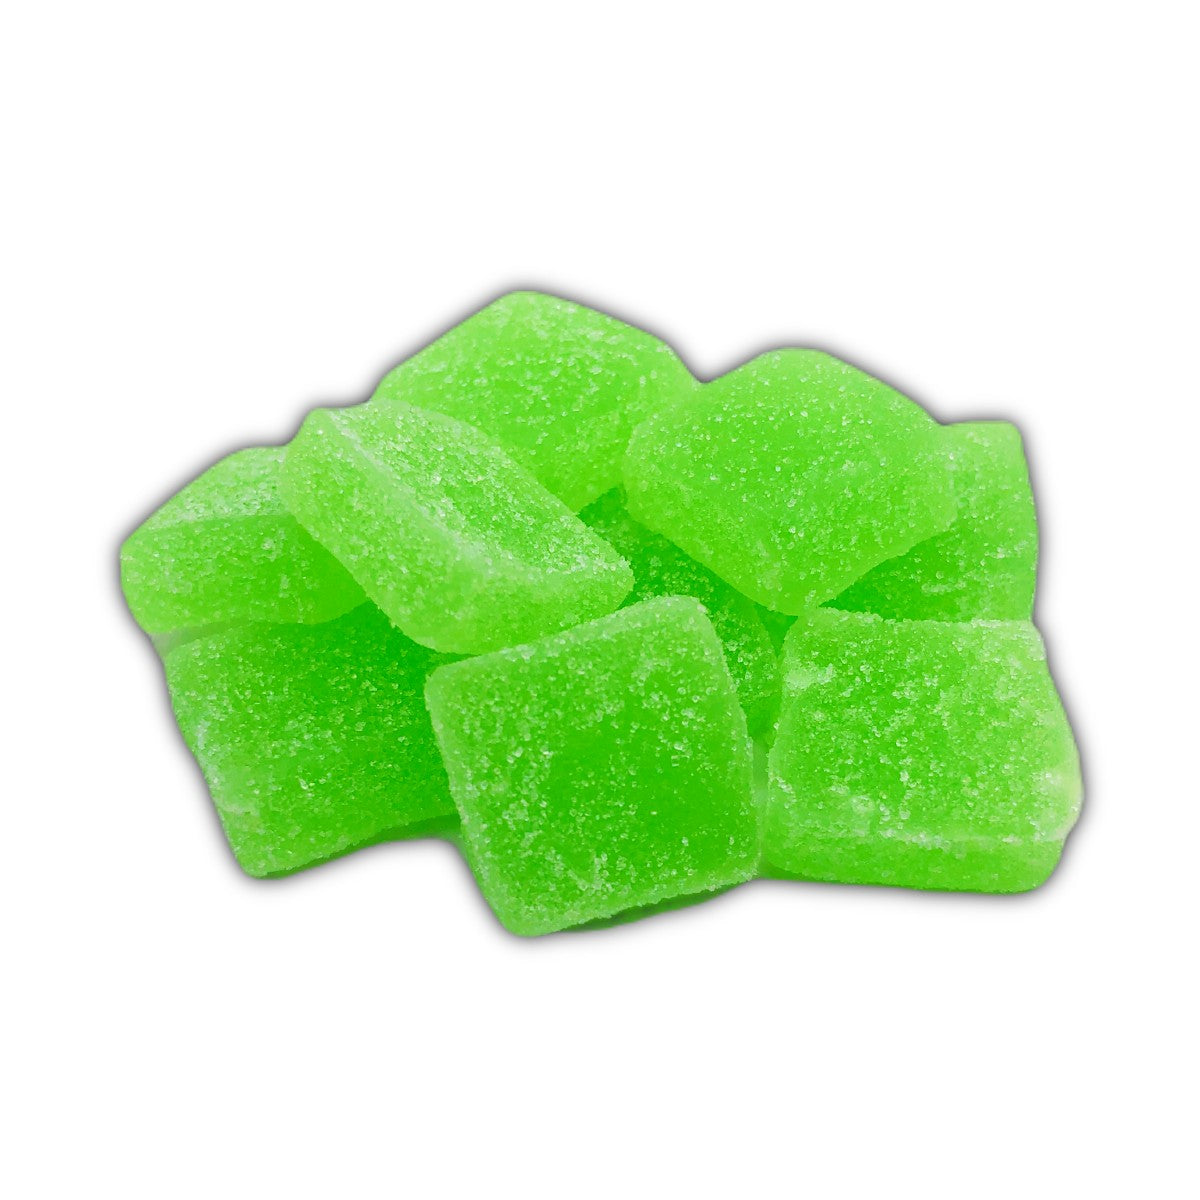 Watermelon Fully Loaded Gummies | Delta 8 Candy | 500mg | 10 PCS